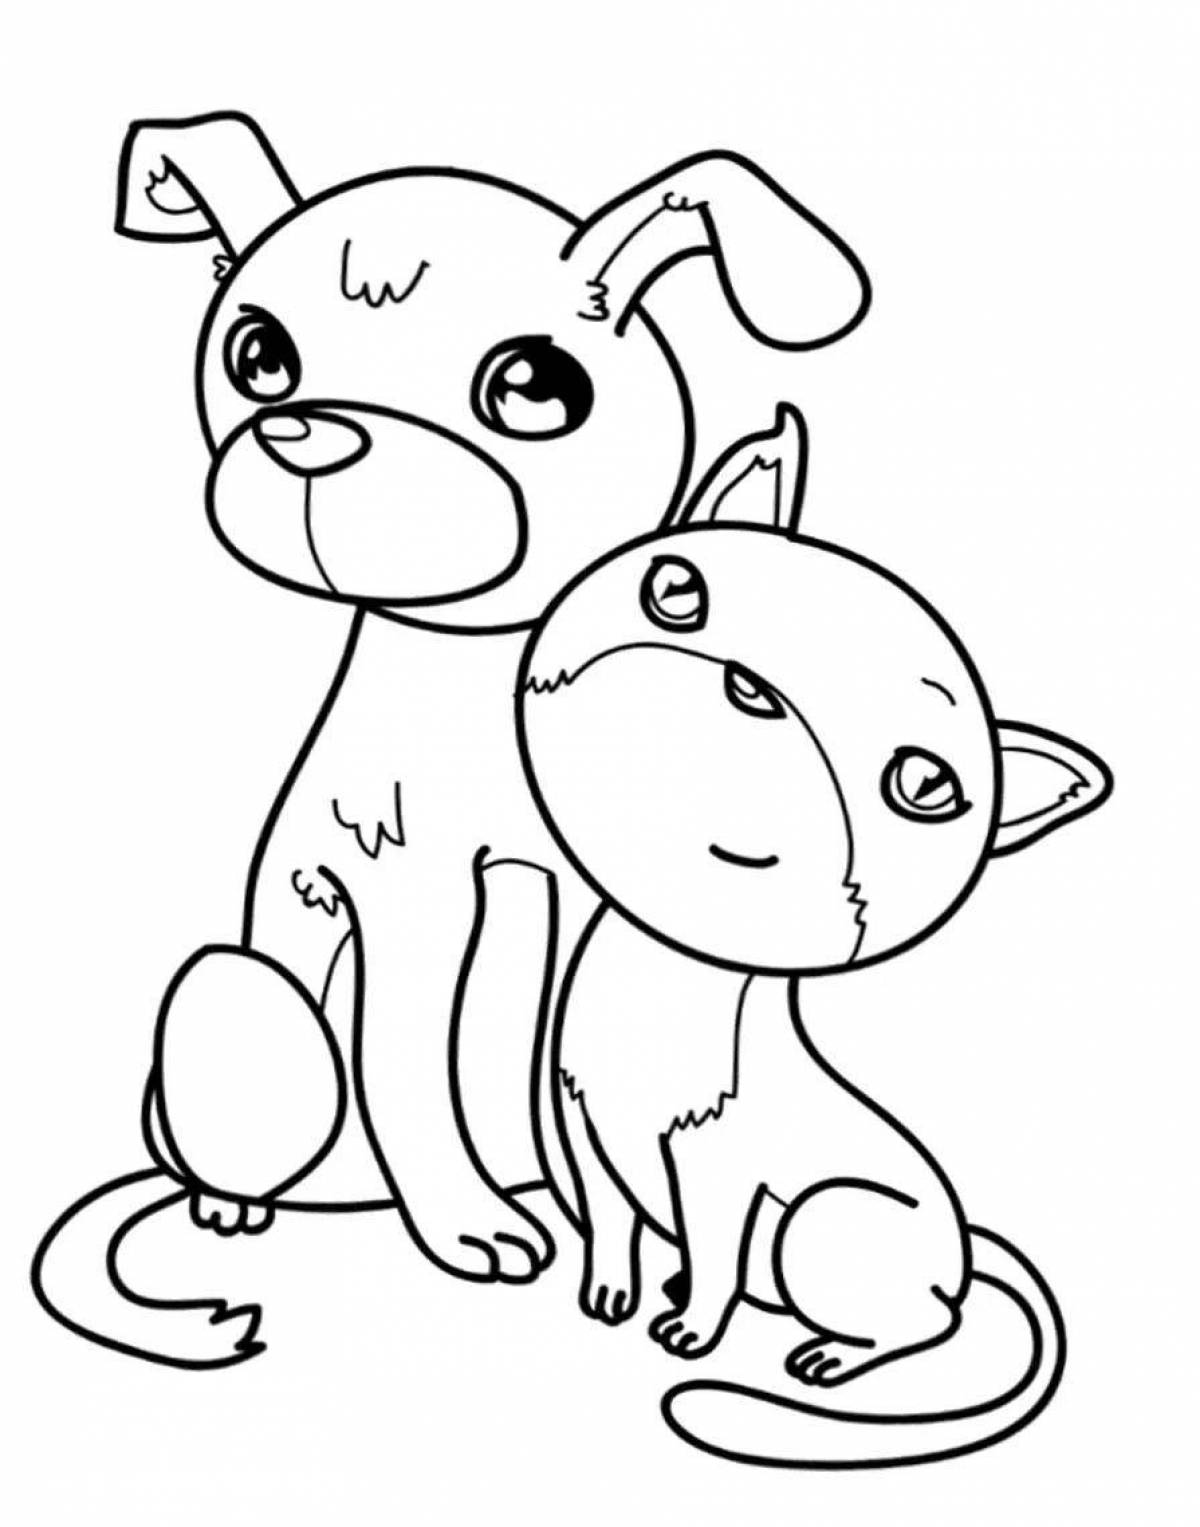 Inviting coloring pages cats dogs Busya